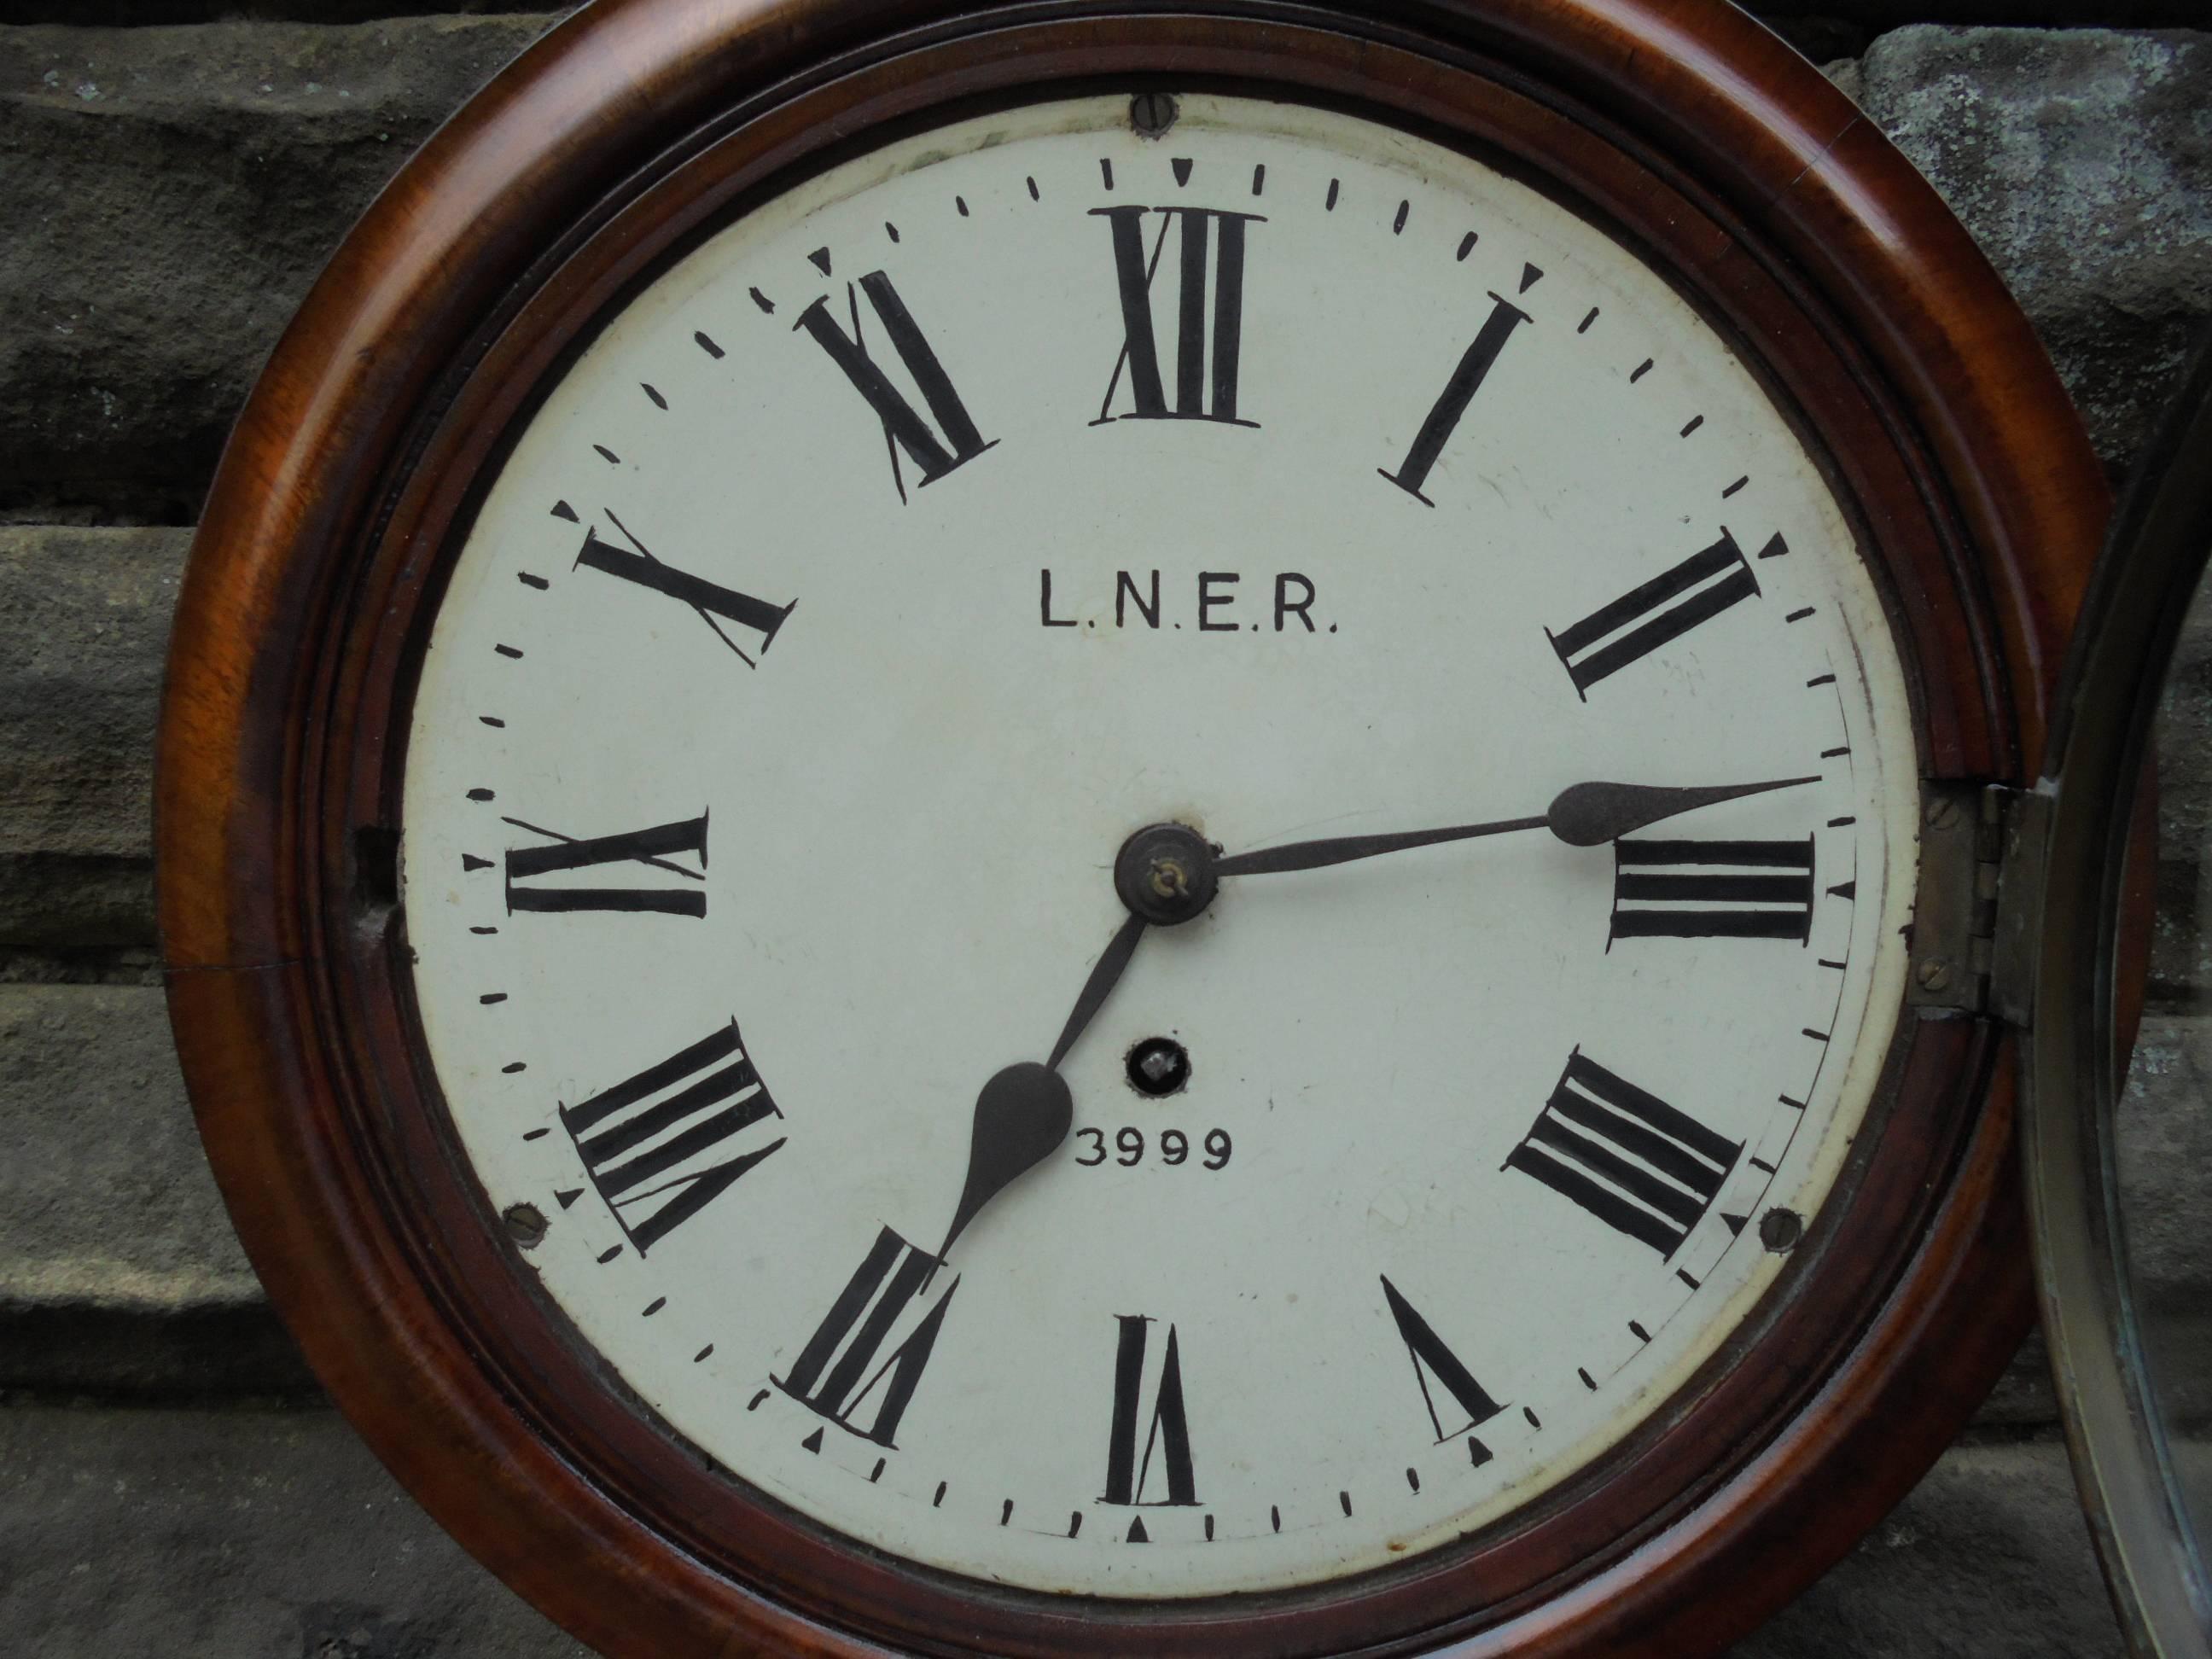 Offered for sale is this antique railway station clock. Hard to find these days.

Mahogany case, brass and glass faced bezel, single Fusee movement. Enamel painted dial with lner 3999. Has the pendulm. There is a door to the bottom with lock (no